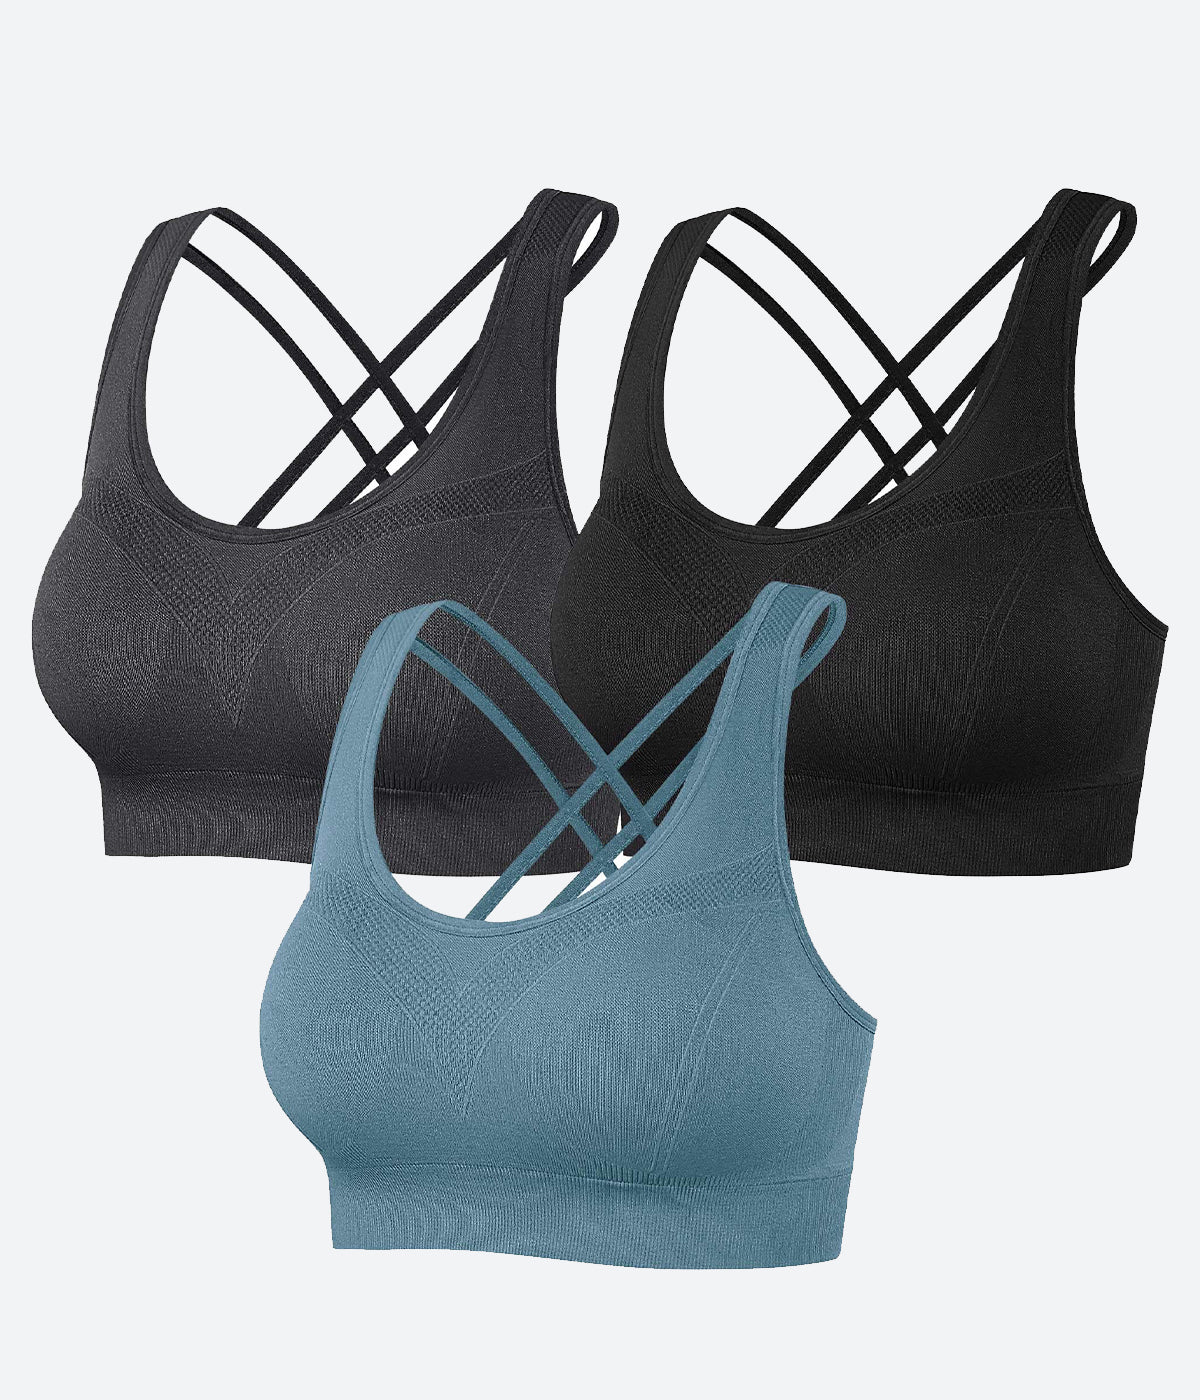 ZIHUA 3 Pack Sports Bras for Women, Sports Bra Backless Comfort Straps with  Removable Chest Pads, Black, White, Gray at  Women's Clothing store